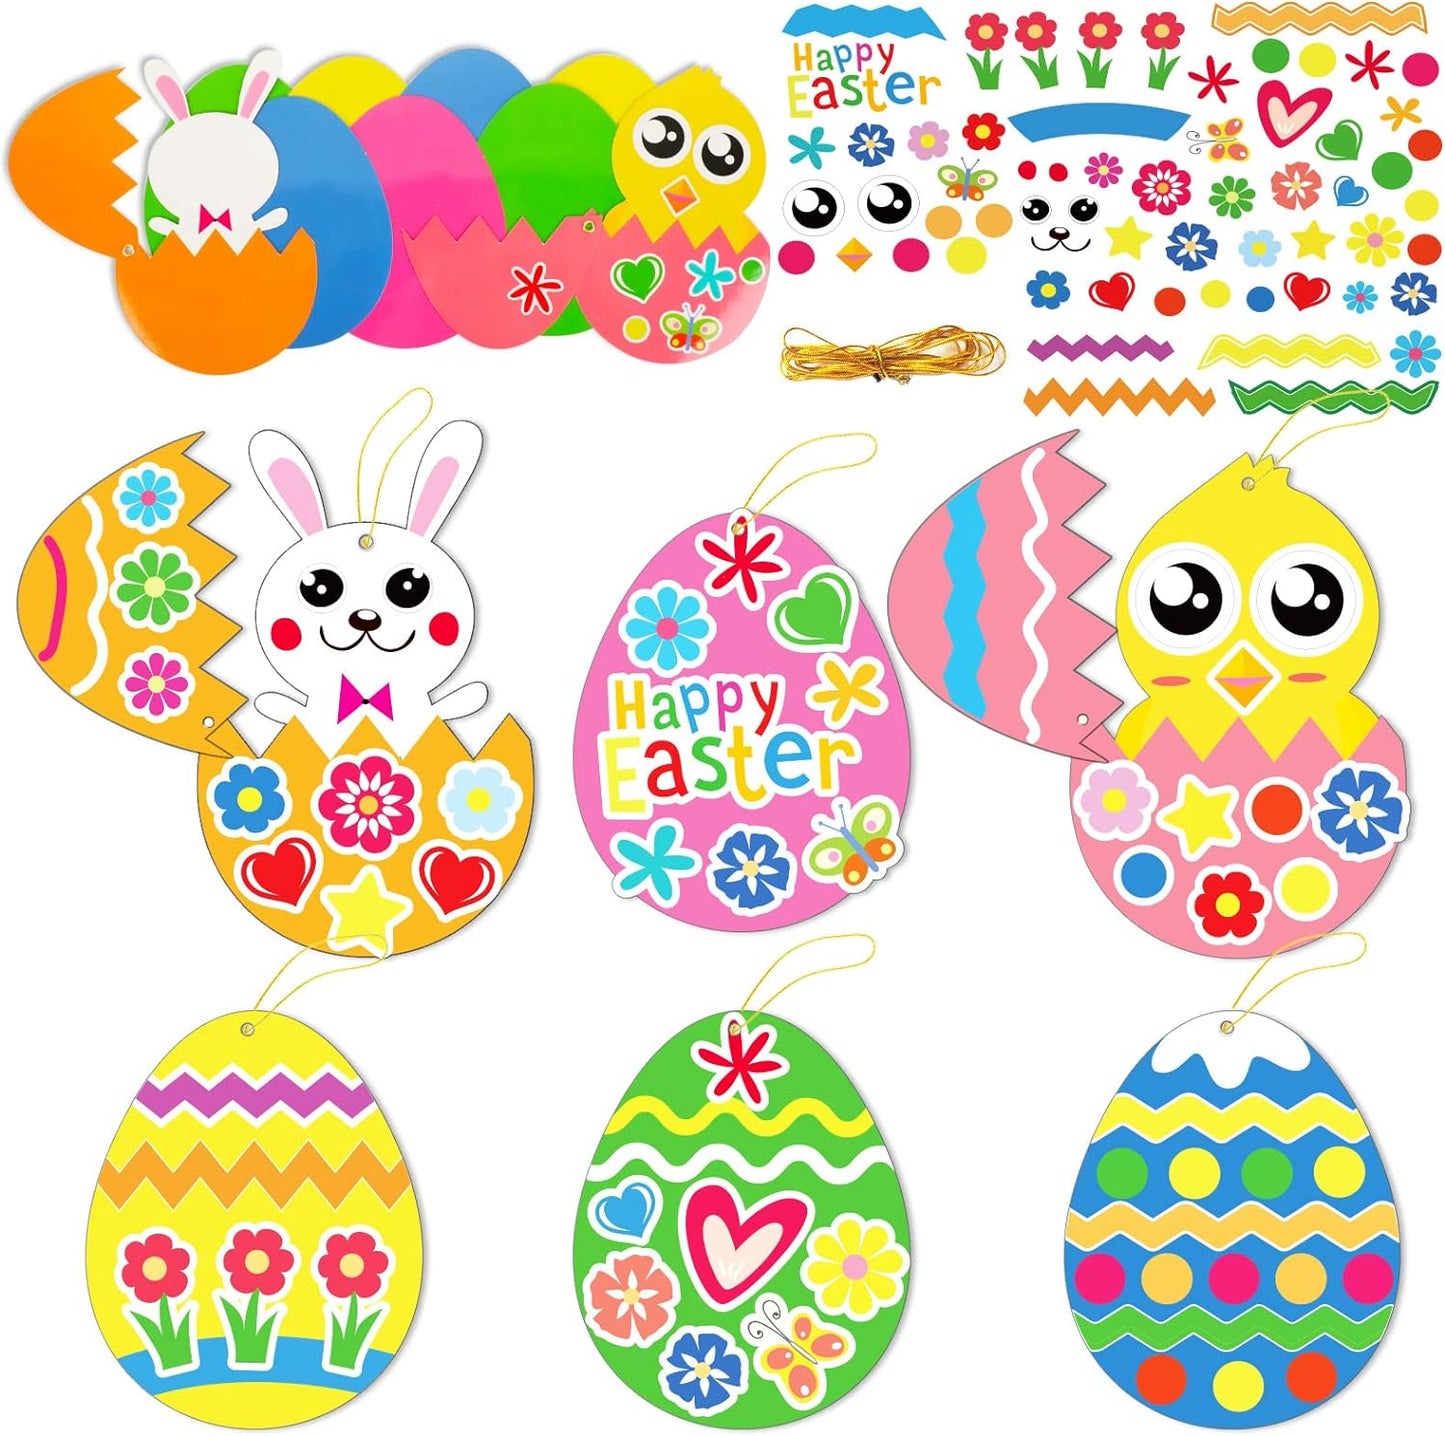 30 PCS First Day of School Craft Kits for Preschool Kids, Colorful Owl DIY Craft Back to School Crafts Bulk Owls Themed Bulletin Board Classroom Game Activities Party Favors